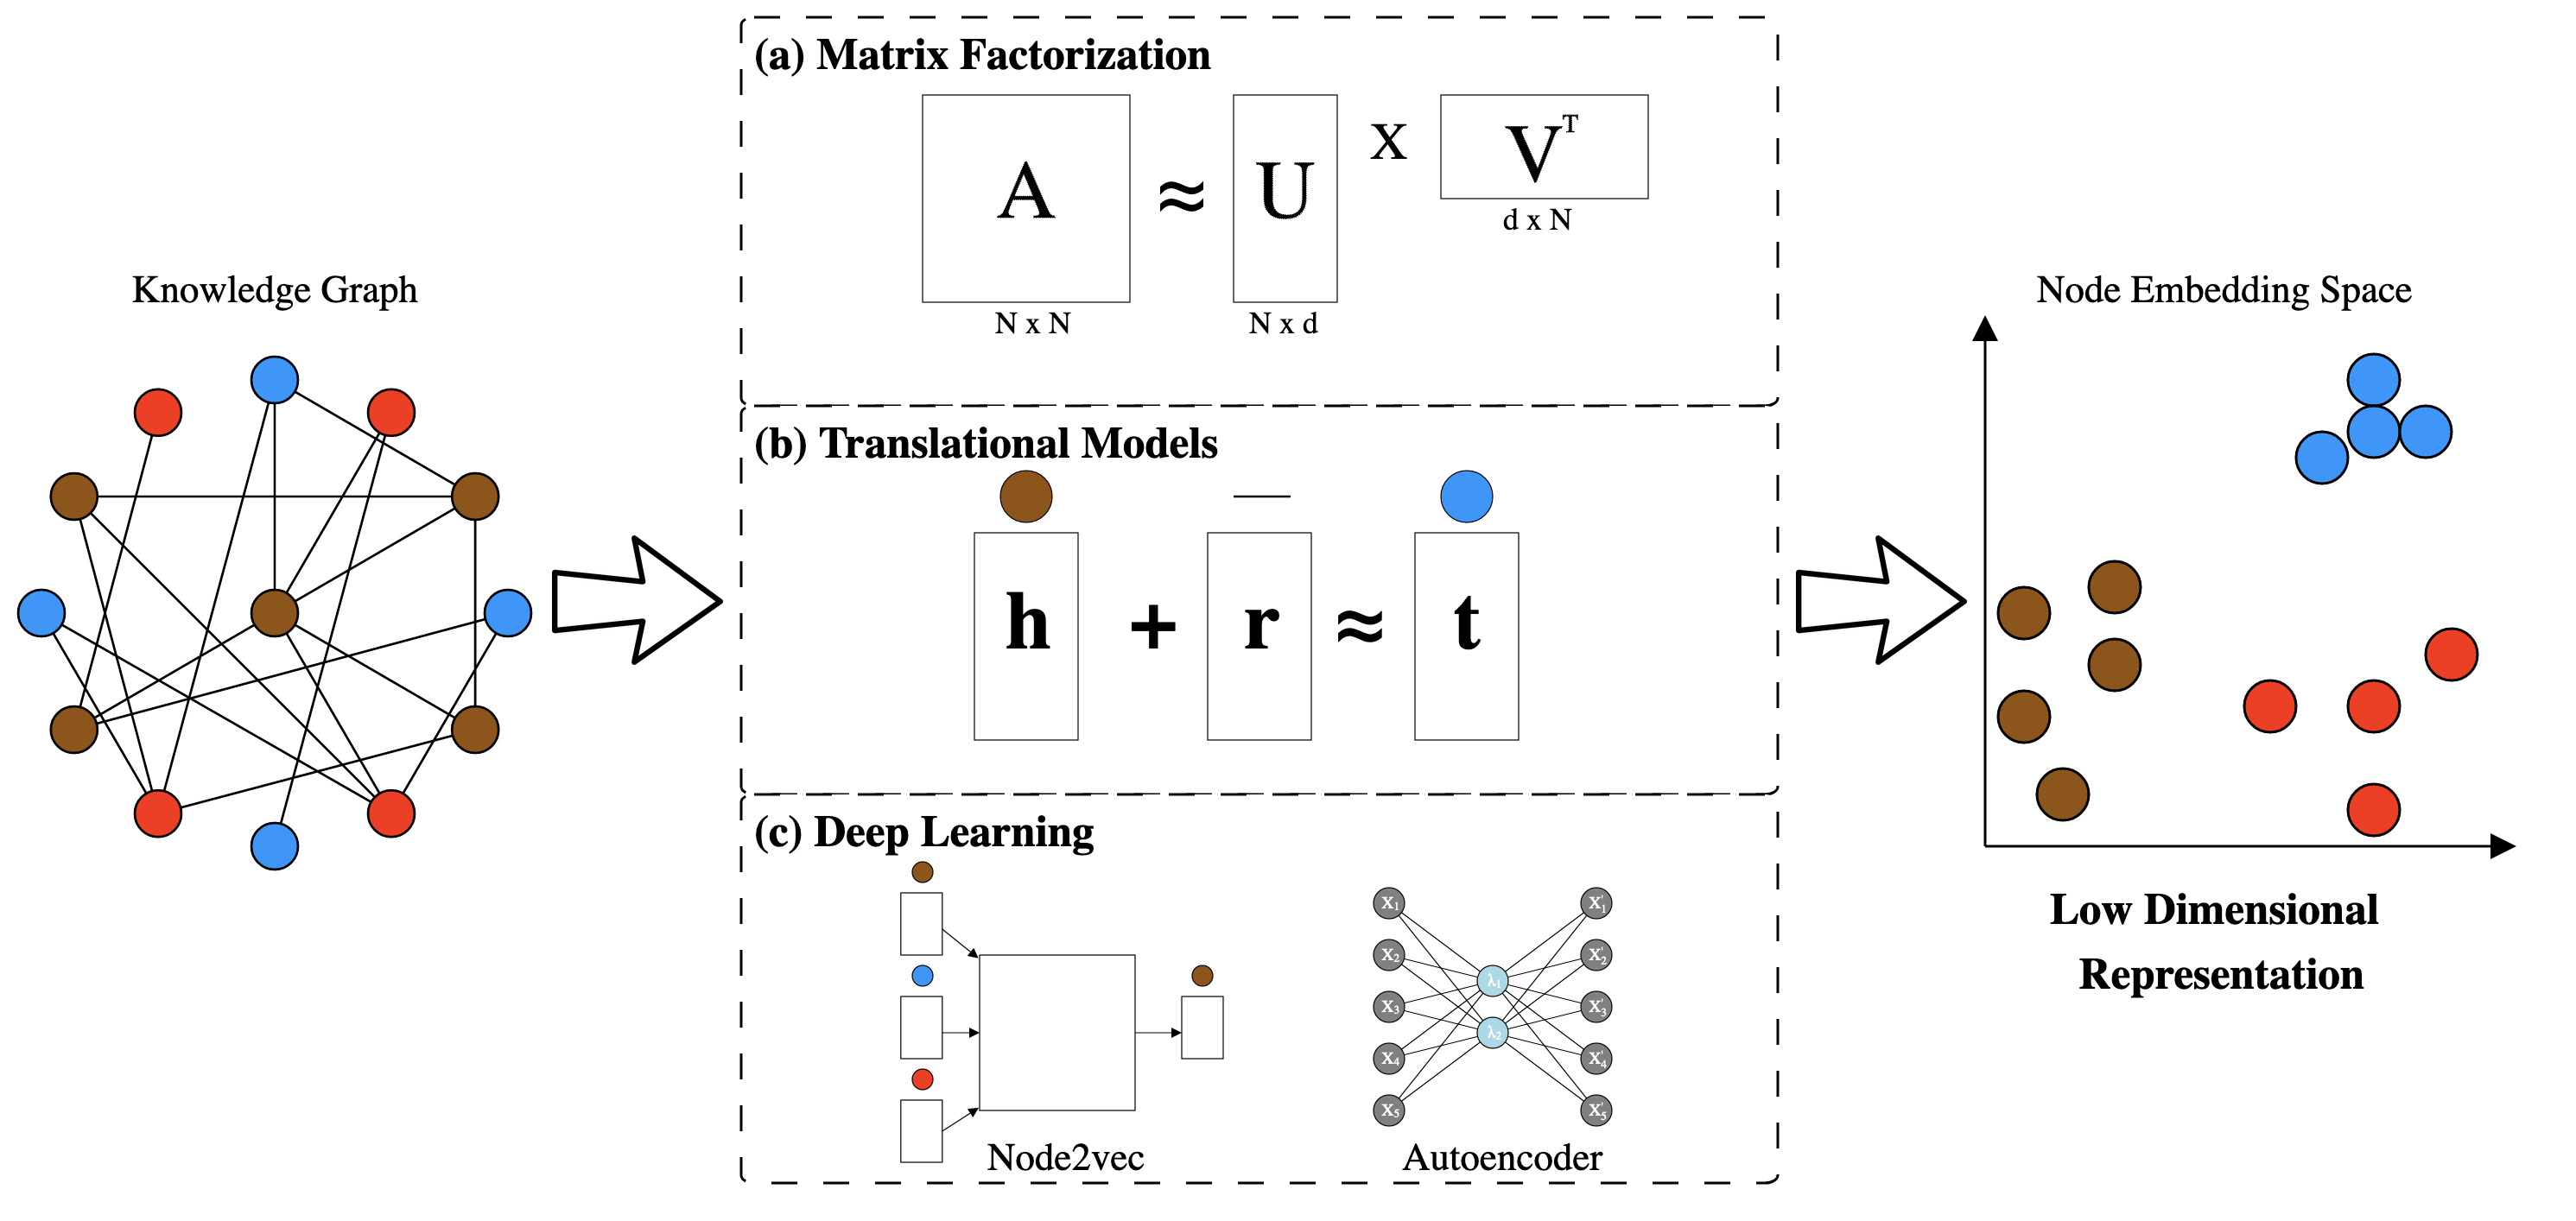 Figure 4: Pipeline for representing knowledge graphs in a low dimensional space. Starting with a knowledge graph, this space can be generated using one of the following options: Matrix Factorization (a), Translational Models (b) or Deep Learning (c). The output of this pipeline is an embedding space that clusters similar node types together.